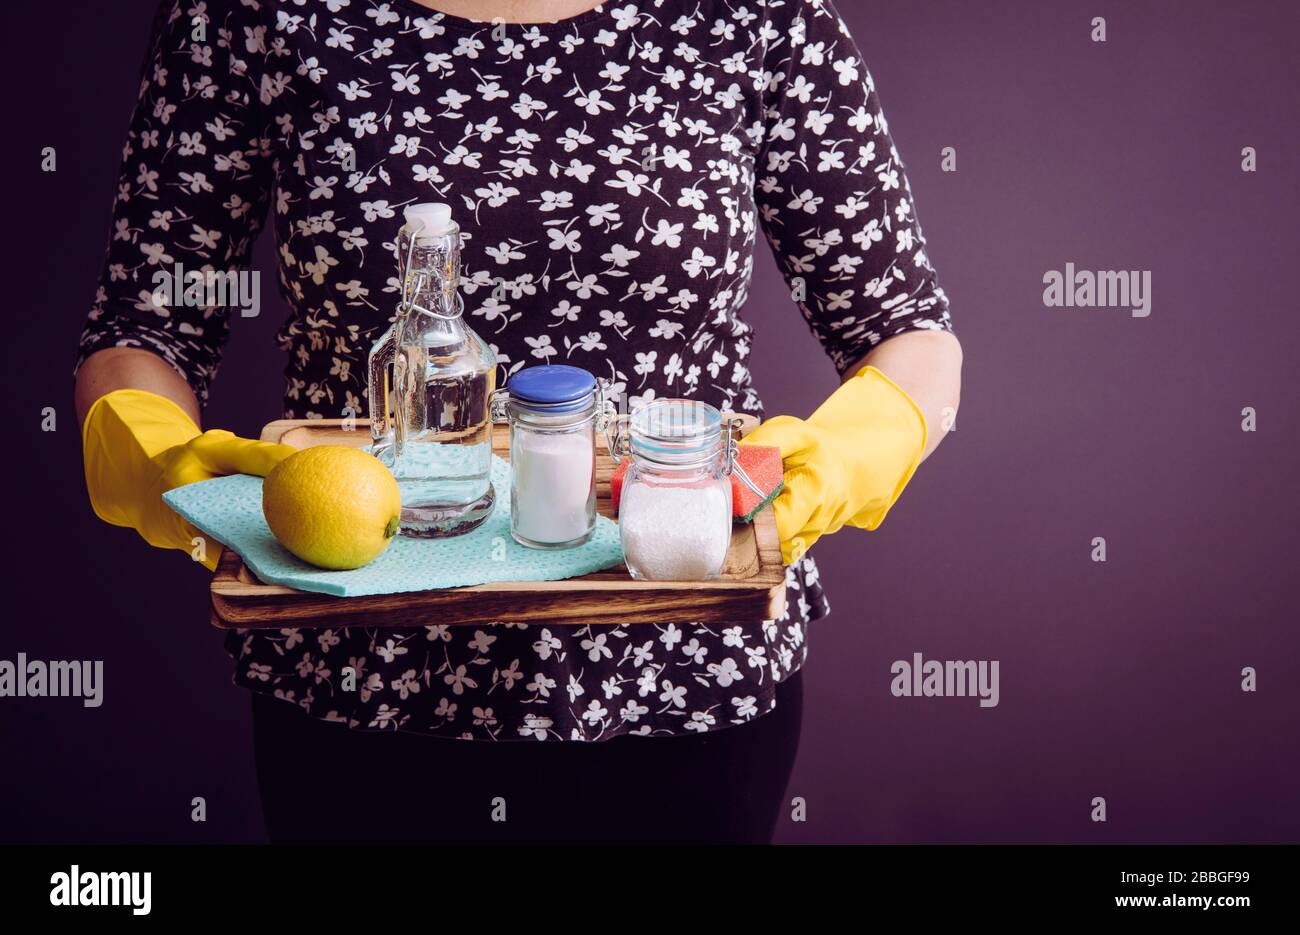 Natural cleaners concept. Woman holding eco friendly home cleaning ingredients, white vinegar, lemon, baking soda, citric acid concept. Stock Photo